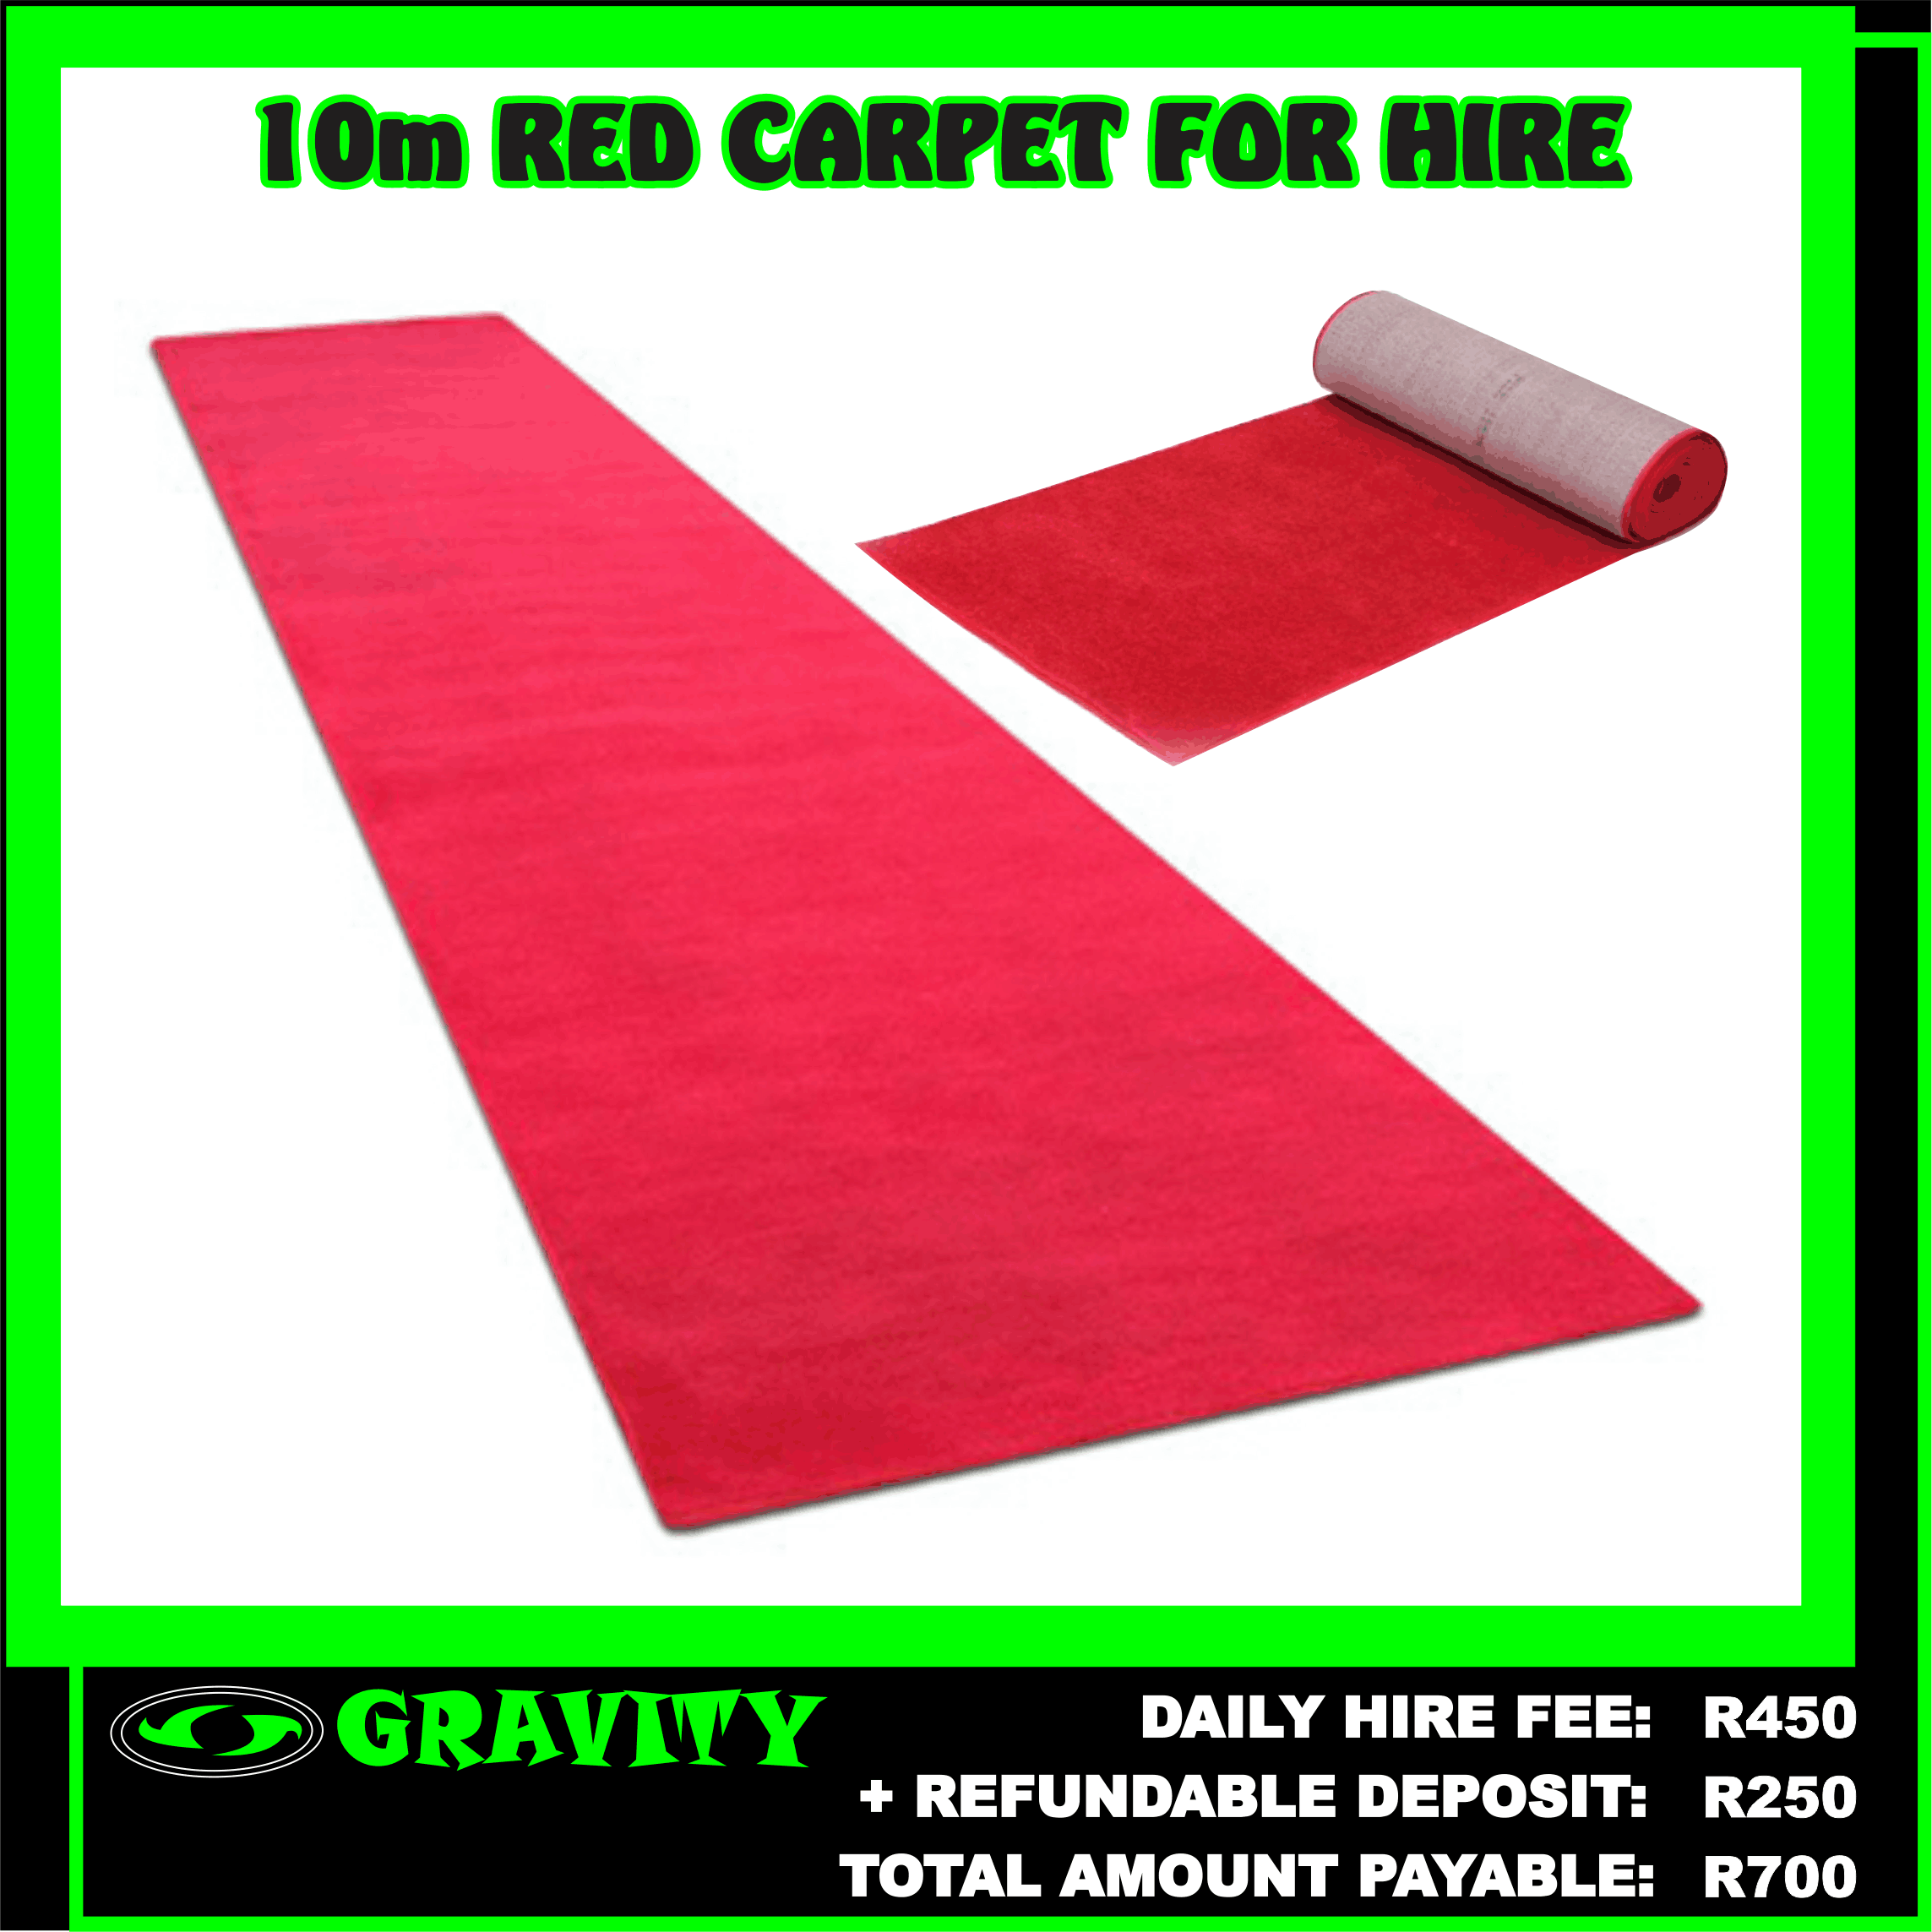 10M RED CARPET OR HIRE 